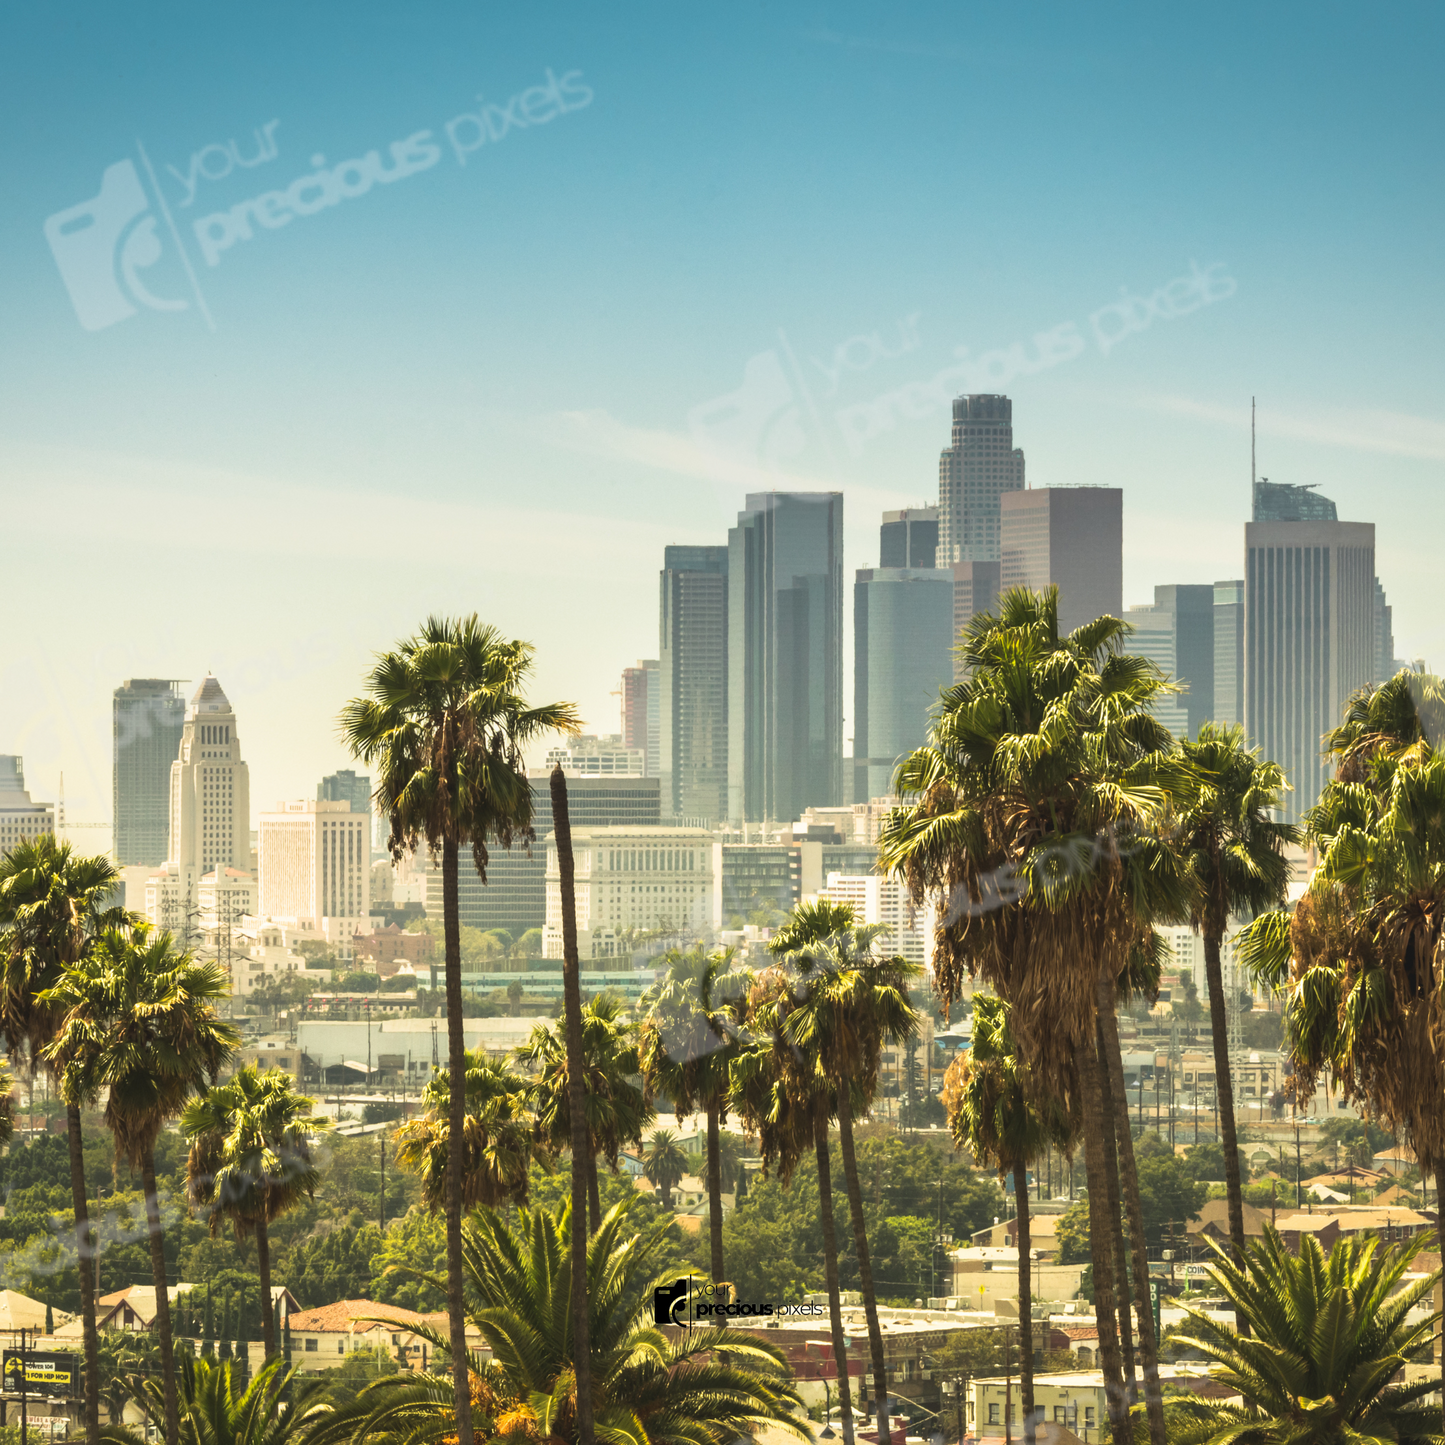 Los Angeles Photo Book Template